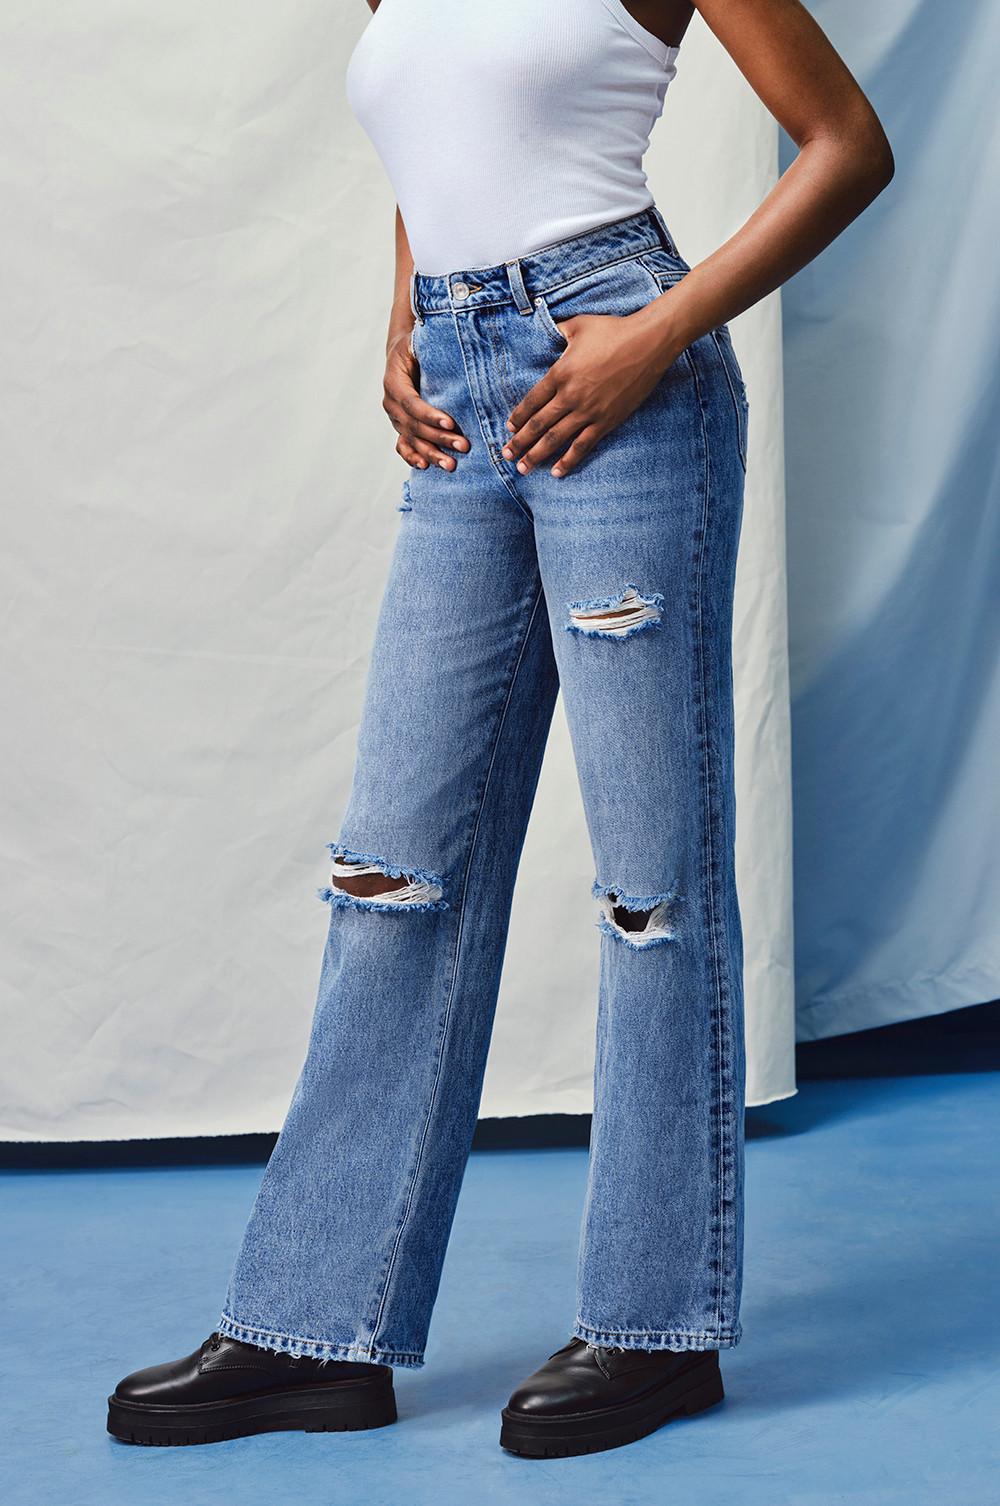 The 90s Ripped Wide Leg Jean